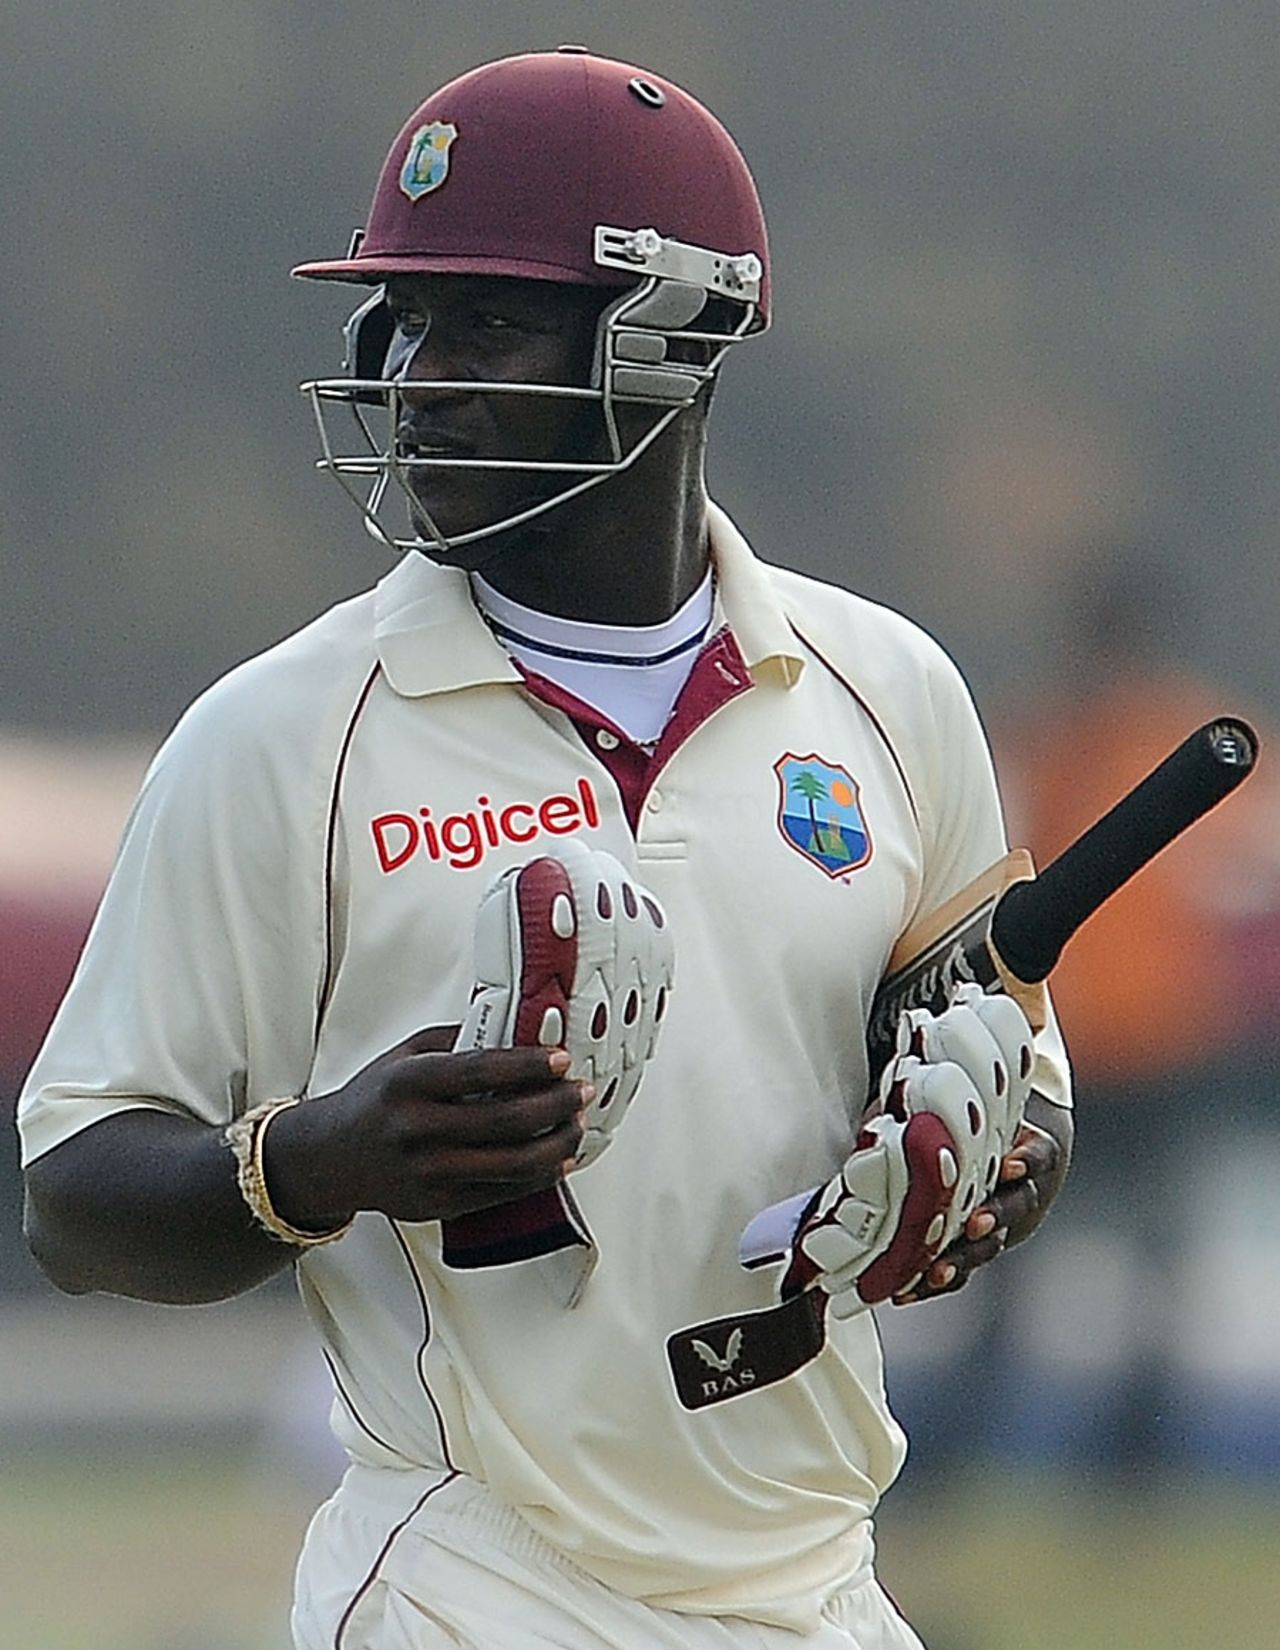 Darren Sammy walks off after being dismissed for a golden duck in his first match as West Indies captain, Sri Lanka v West Indies, 1st Test, Galle, 2nd day, November 16, 2010